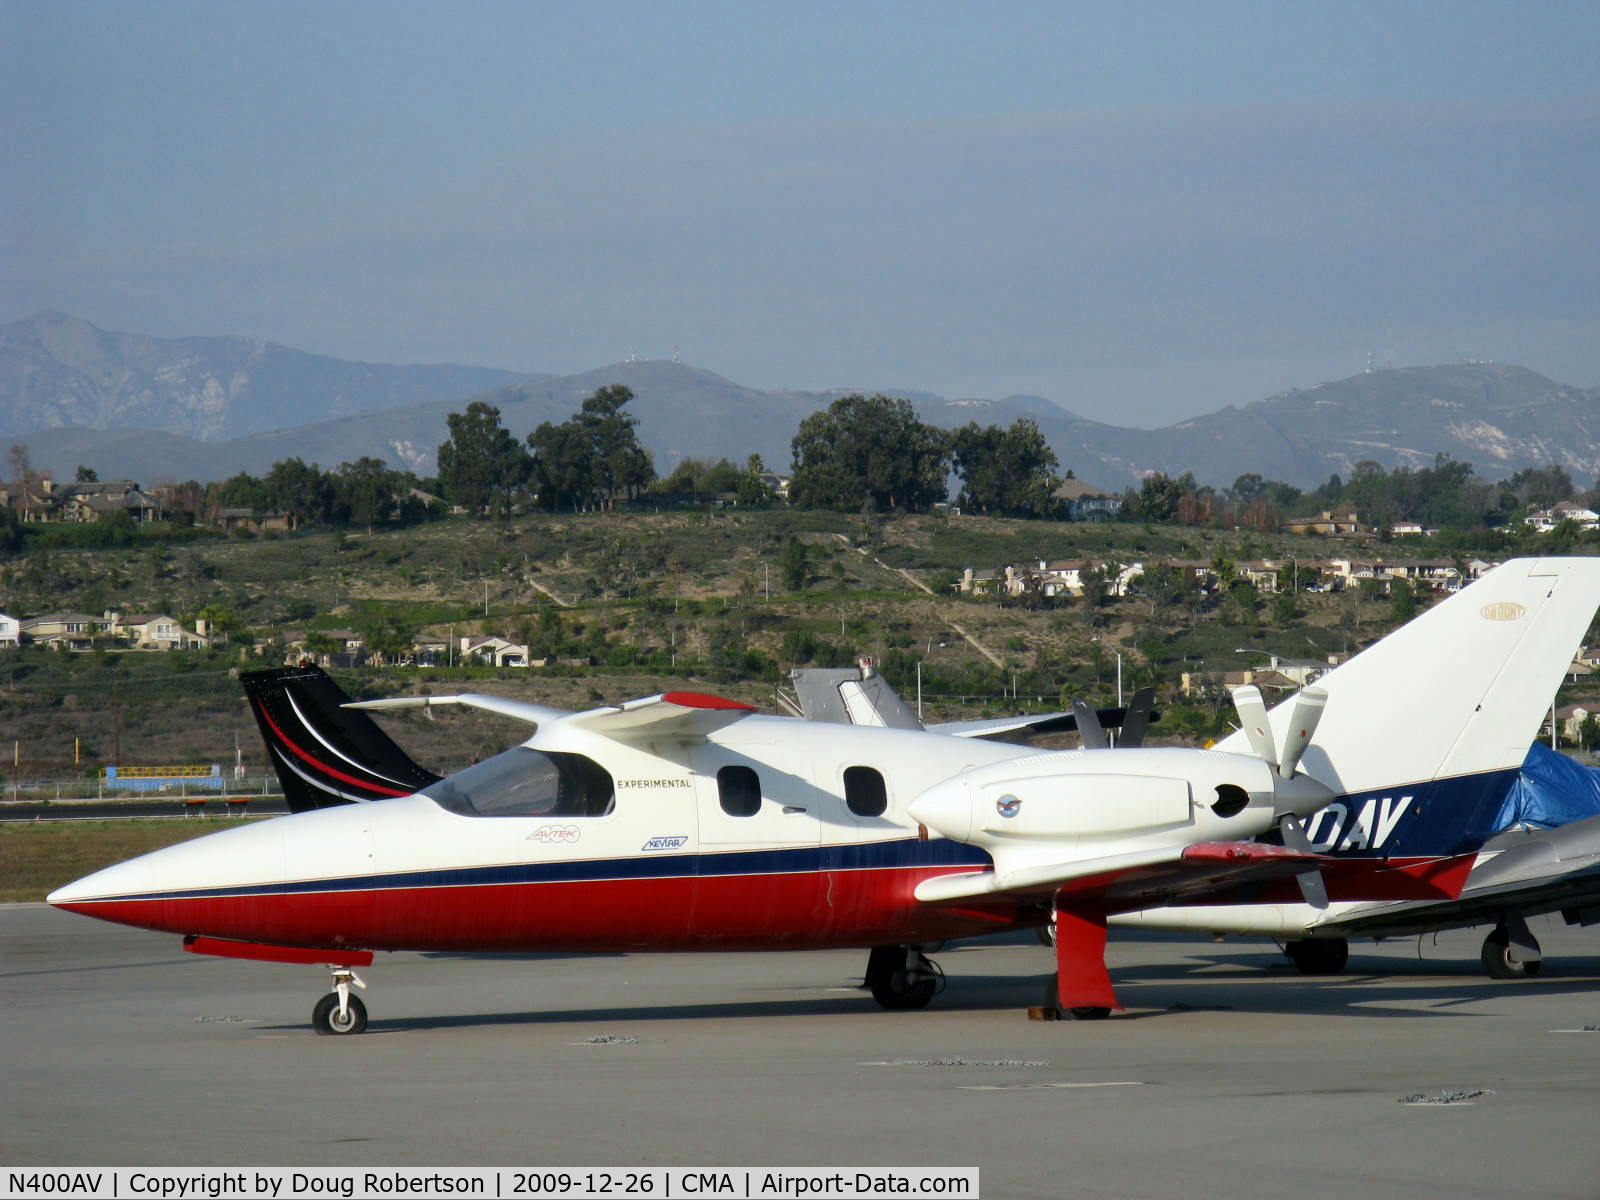 N400AV, 1984 Avtek Corporation 400 C/N POC-001, 1984 AVTEK 400 proof-of-concept composite twin turboprop pusher canard eight place business aircraft, 1-2 pilots, one-off, two P&W(C)PT6A-3 680 shp each, design by Al Mooney